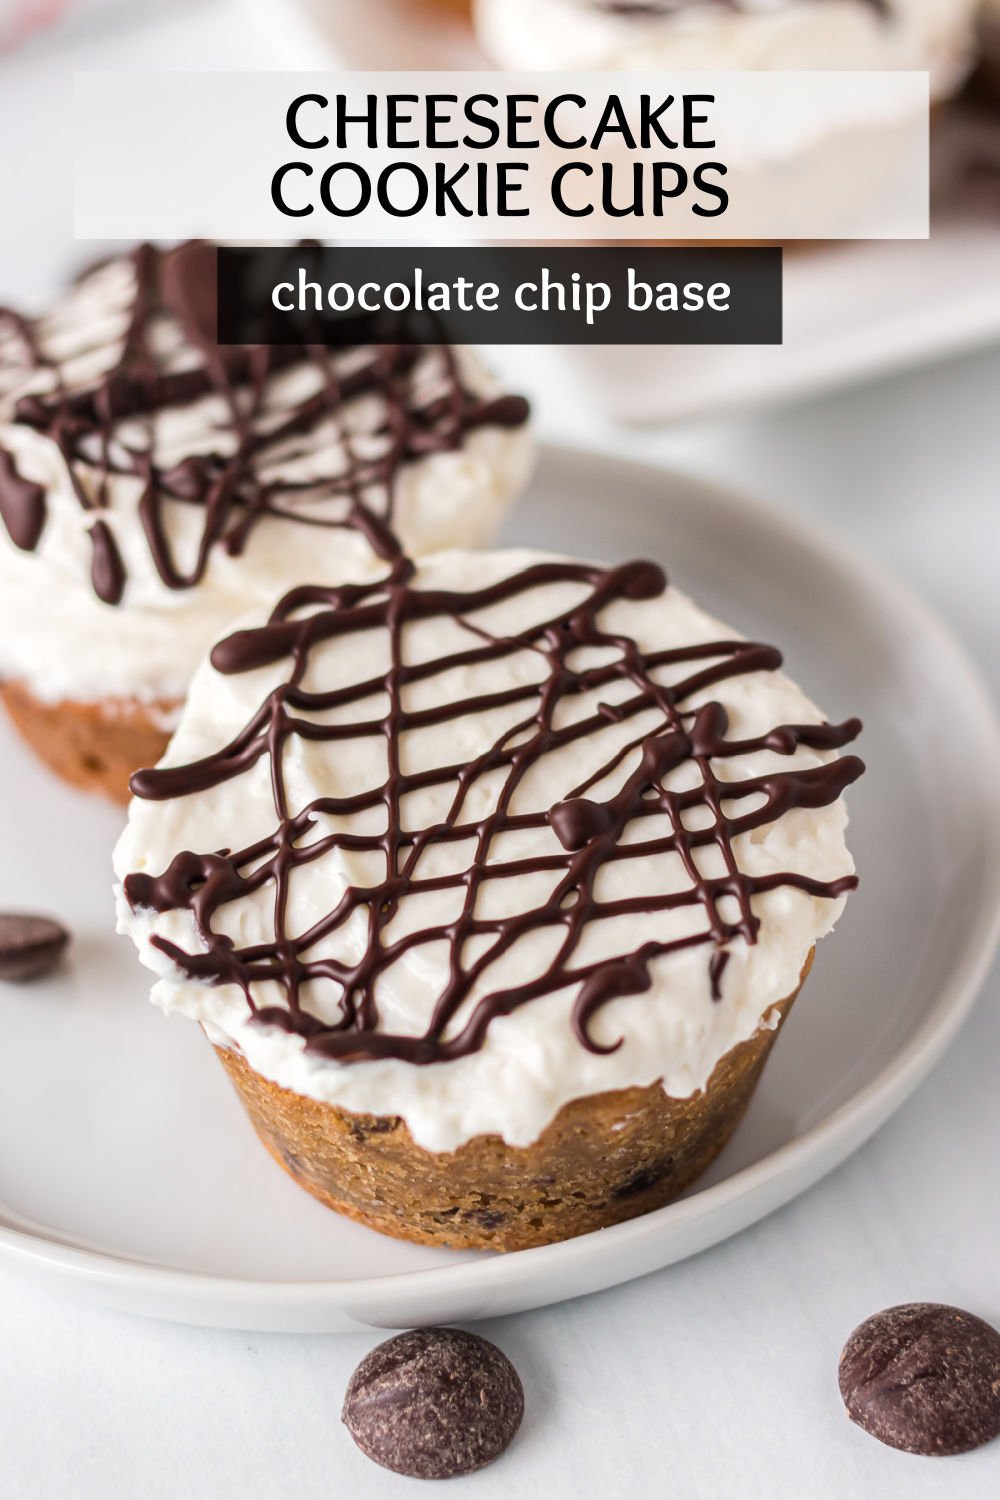 Cheesecake Cookie Cups start with a chocolate chip cookie base (pre-made or from scratch) and then are filled with an four ingredient, fluffy, no-bake cheesecake filling. Finish it all off with a chocolate drizzle and you have an easy and delicious mini dessert!
